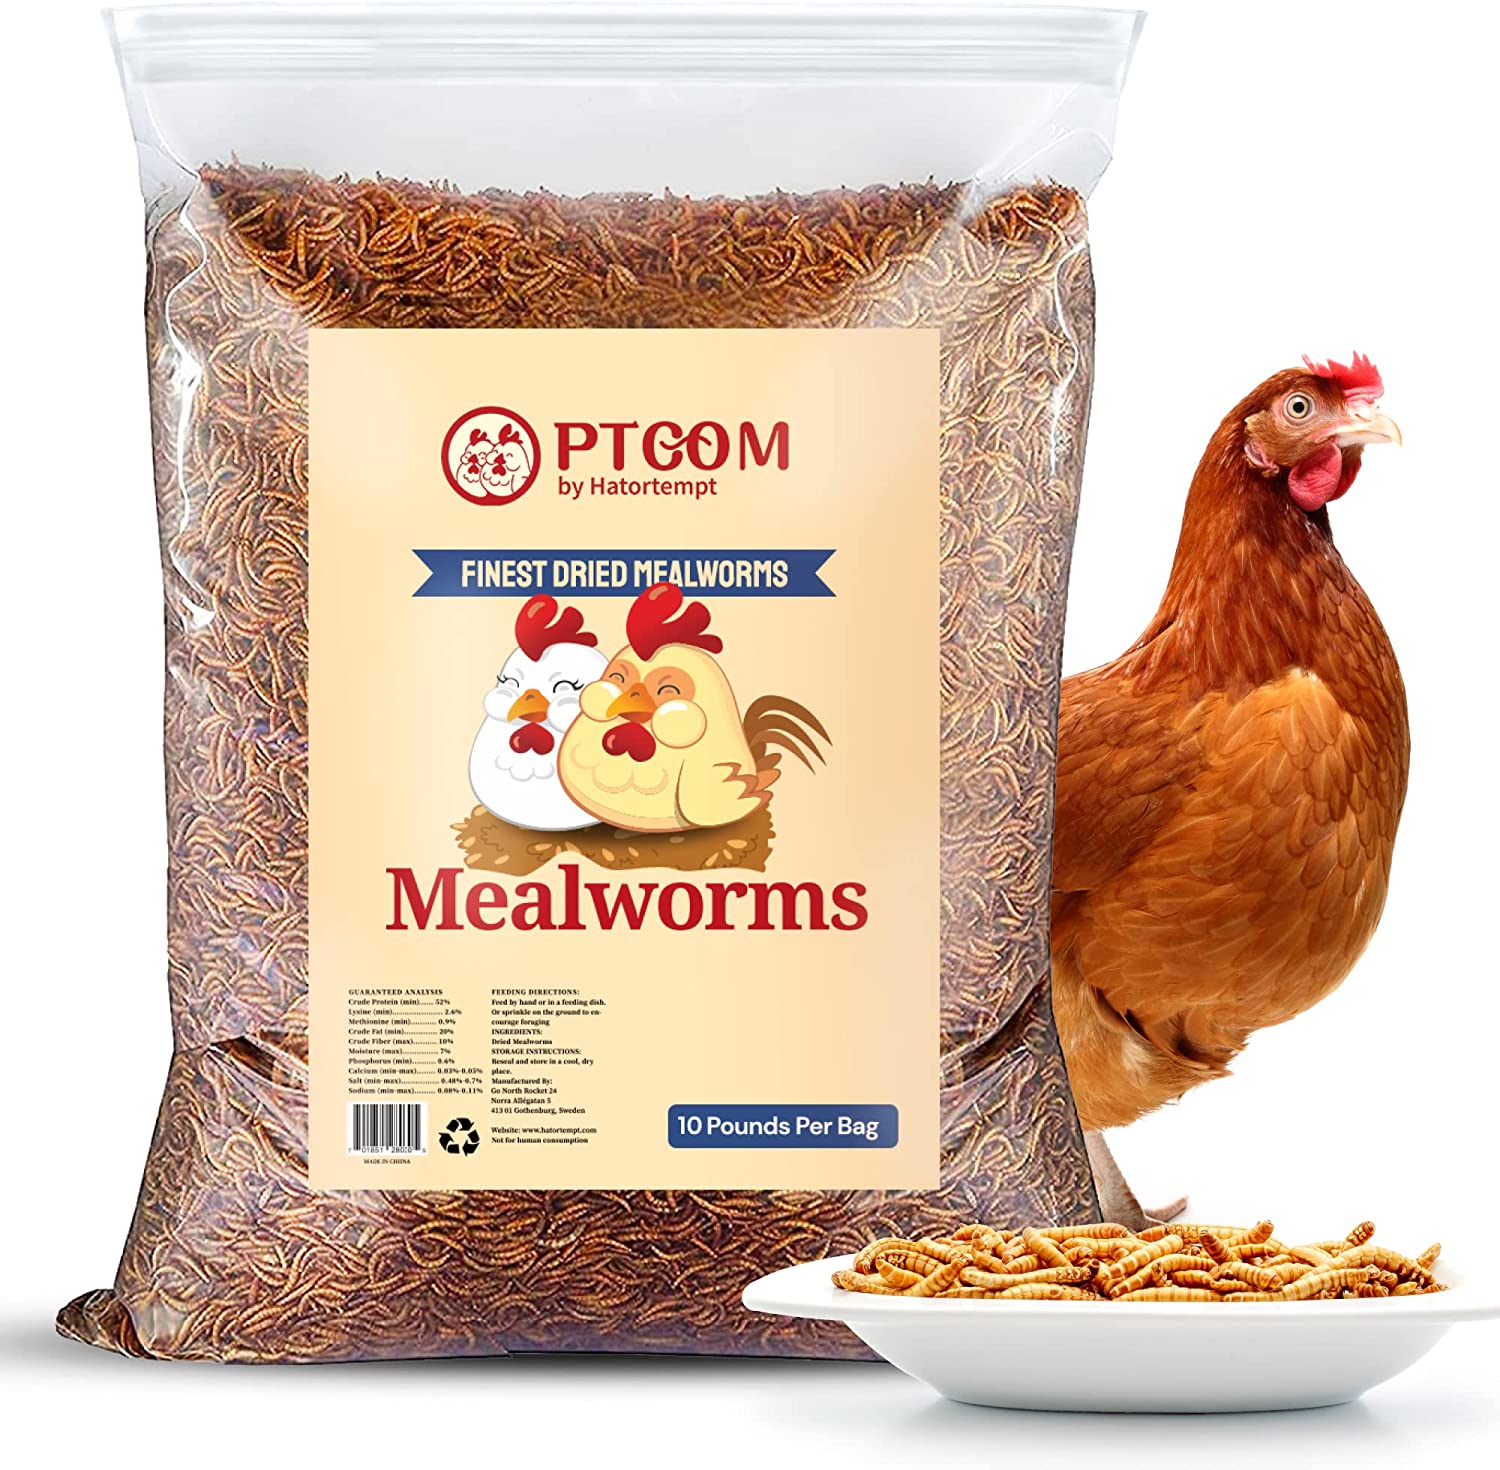 HATORTEMPT 10lbs Bulk Dried Mealworms - Premium Organic Non-GMO Chicken Feed. Nutritious High Protein Meal Worms- Food and Treats for Laying Hens, Wild Birds, Ducks, Reptiles, Fish, Hedgehogs, Turtles